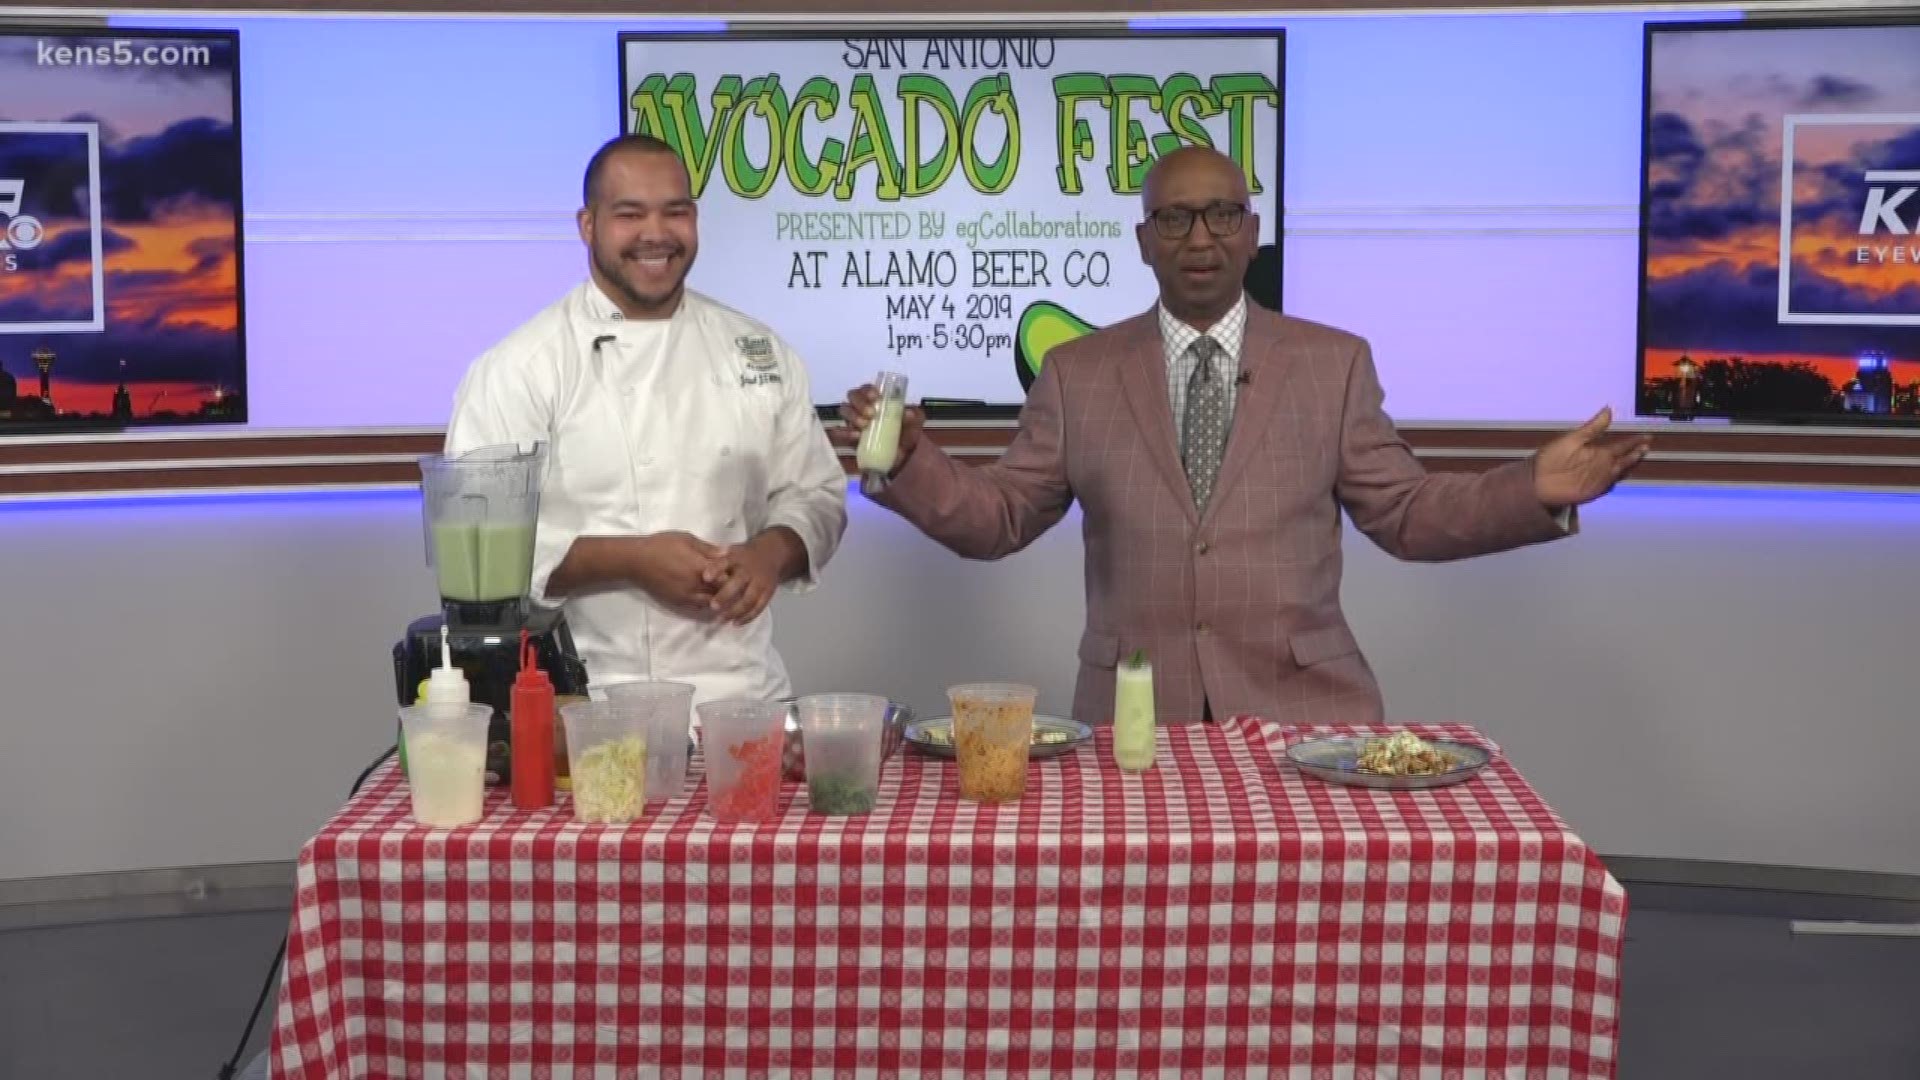 Avocado lovers rejoice! Jerrell Williams is stopping by the KENS 5 studio to share a few delicacies that will be featured at San Antonio's first Avocado Fest!